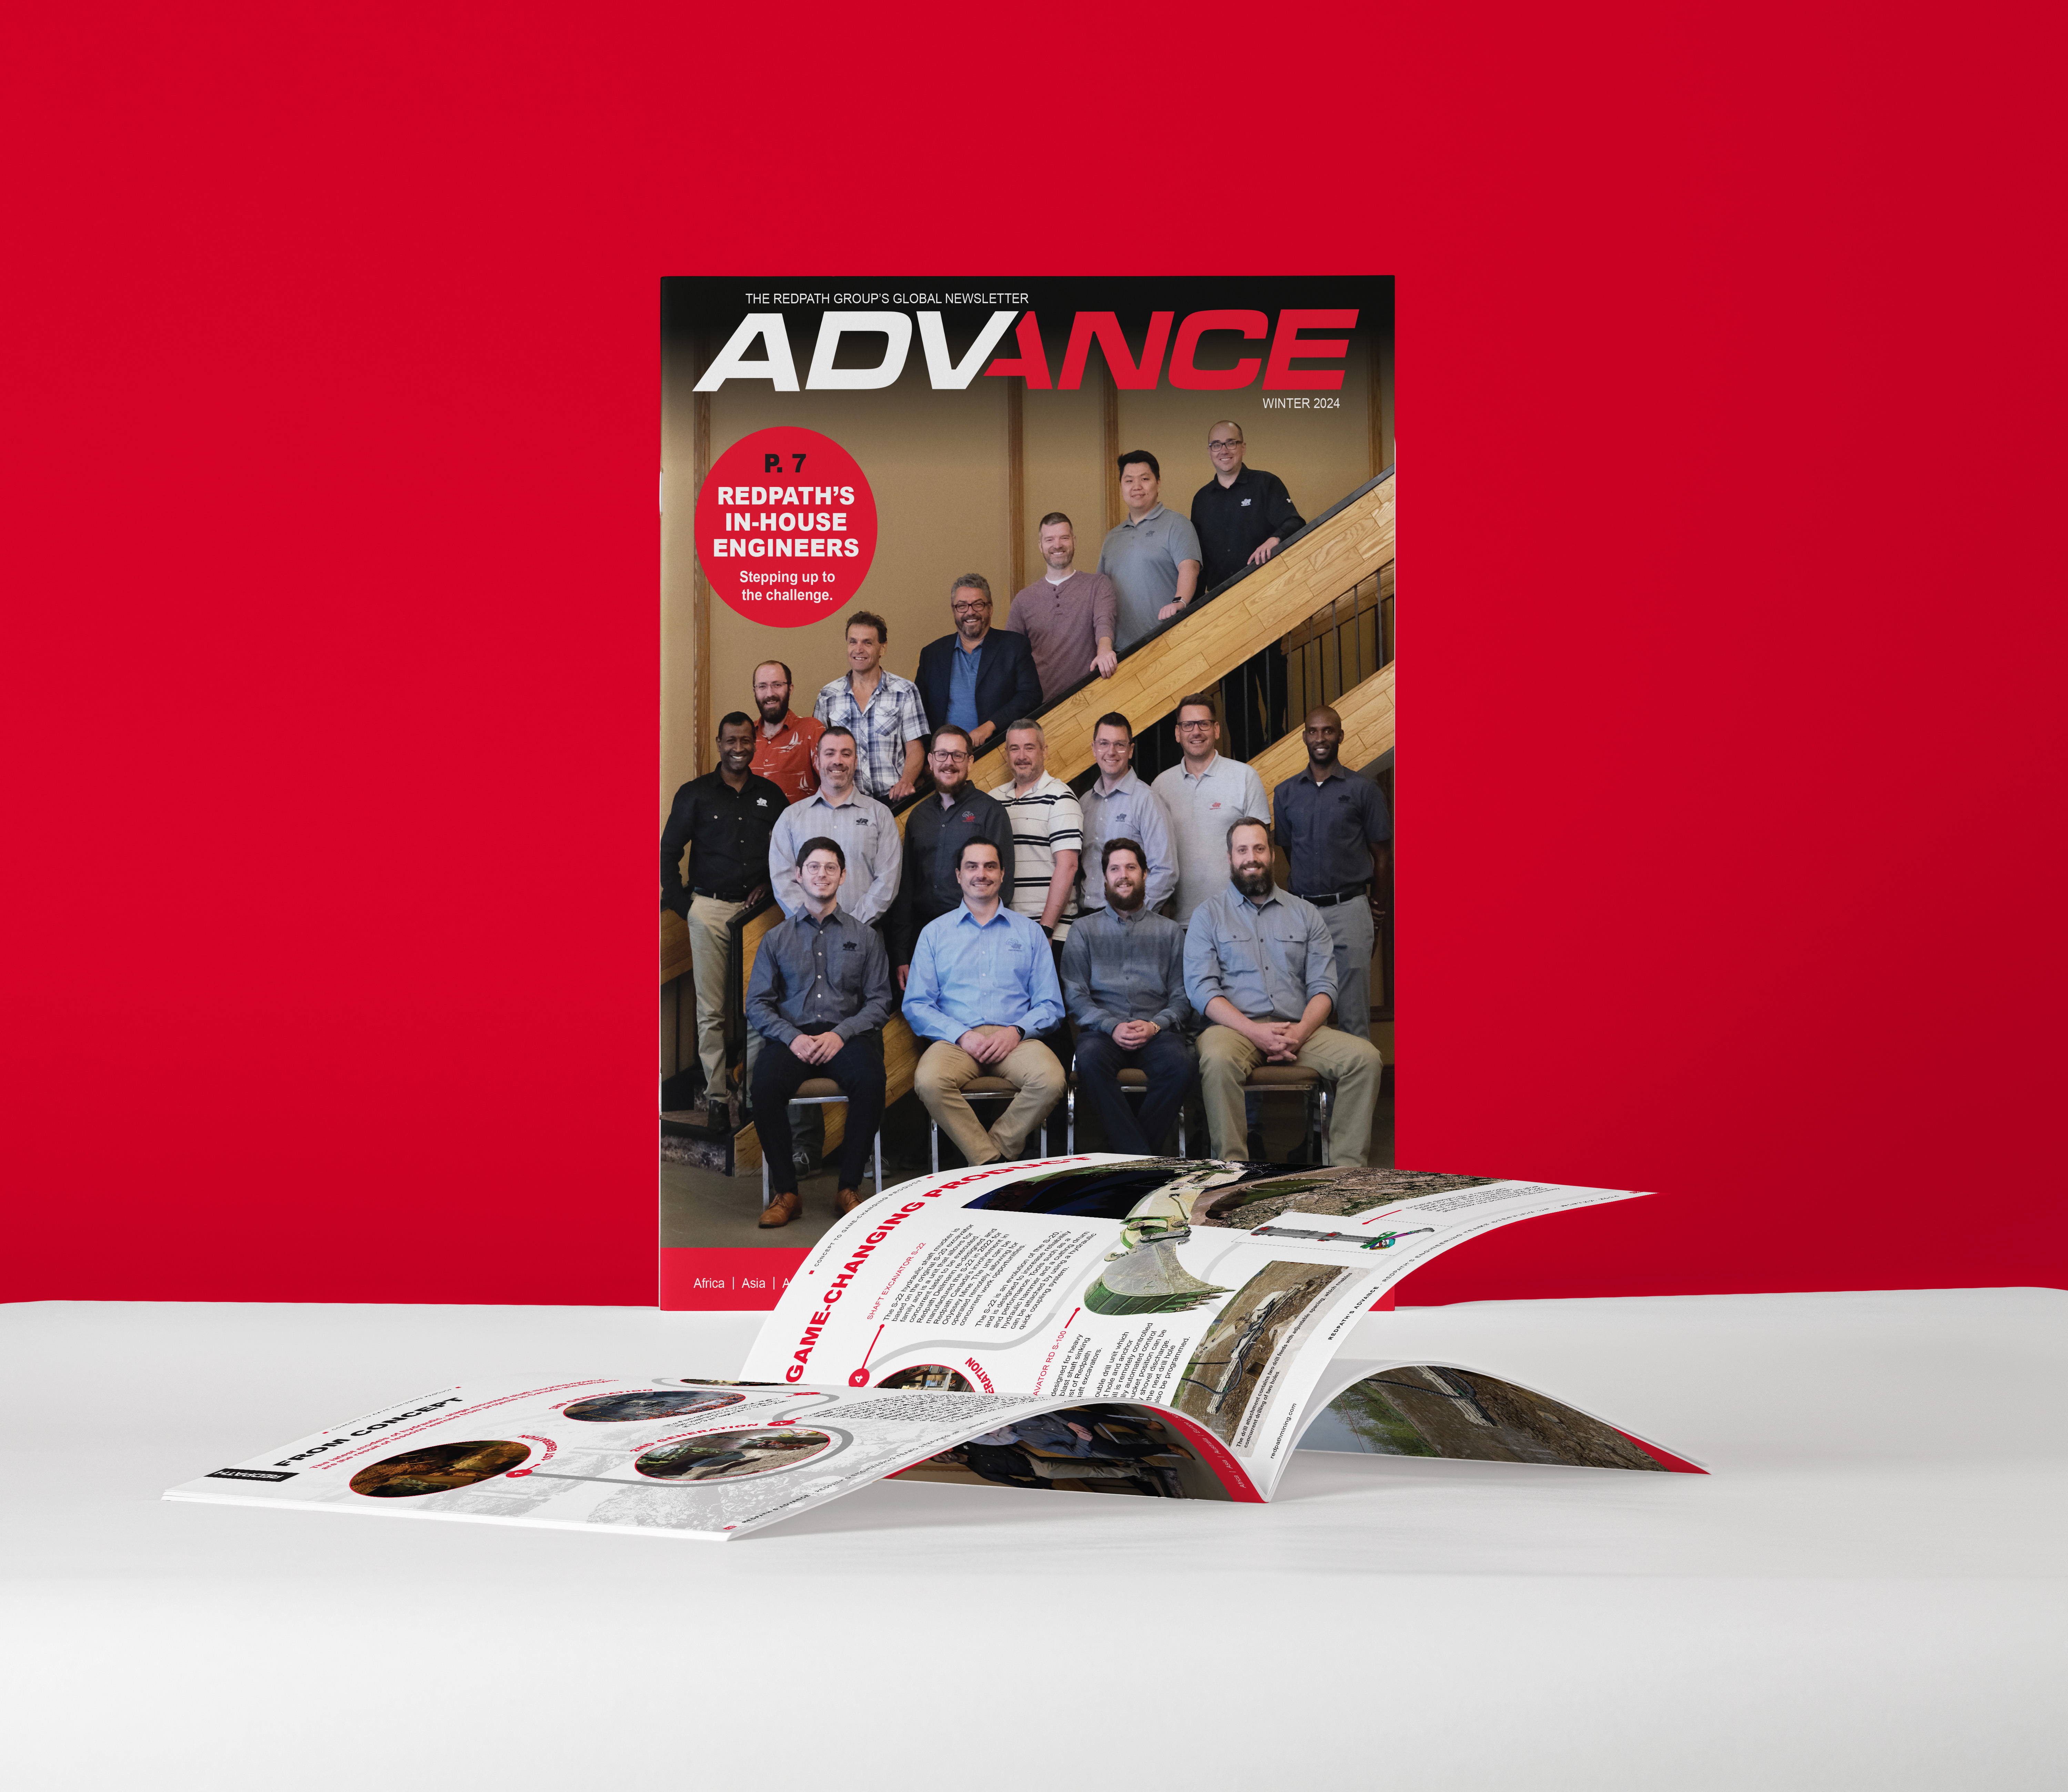 Cover of the Advance publication showing Redpath's engineers lined up on a staircase.